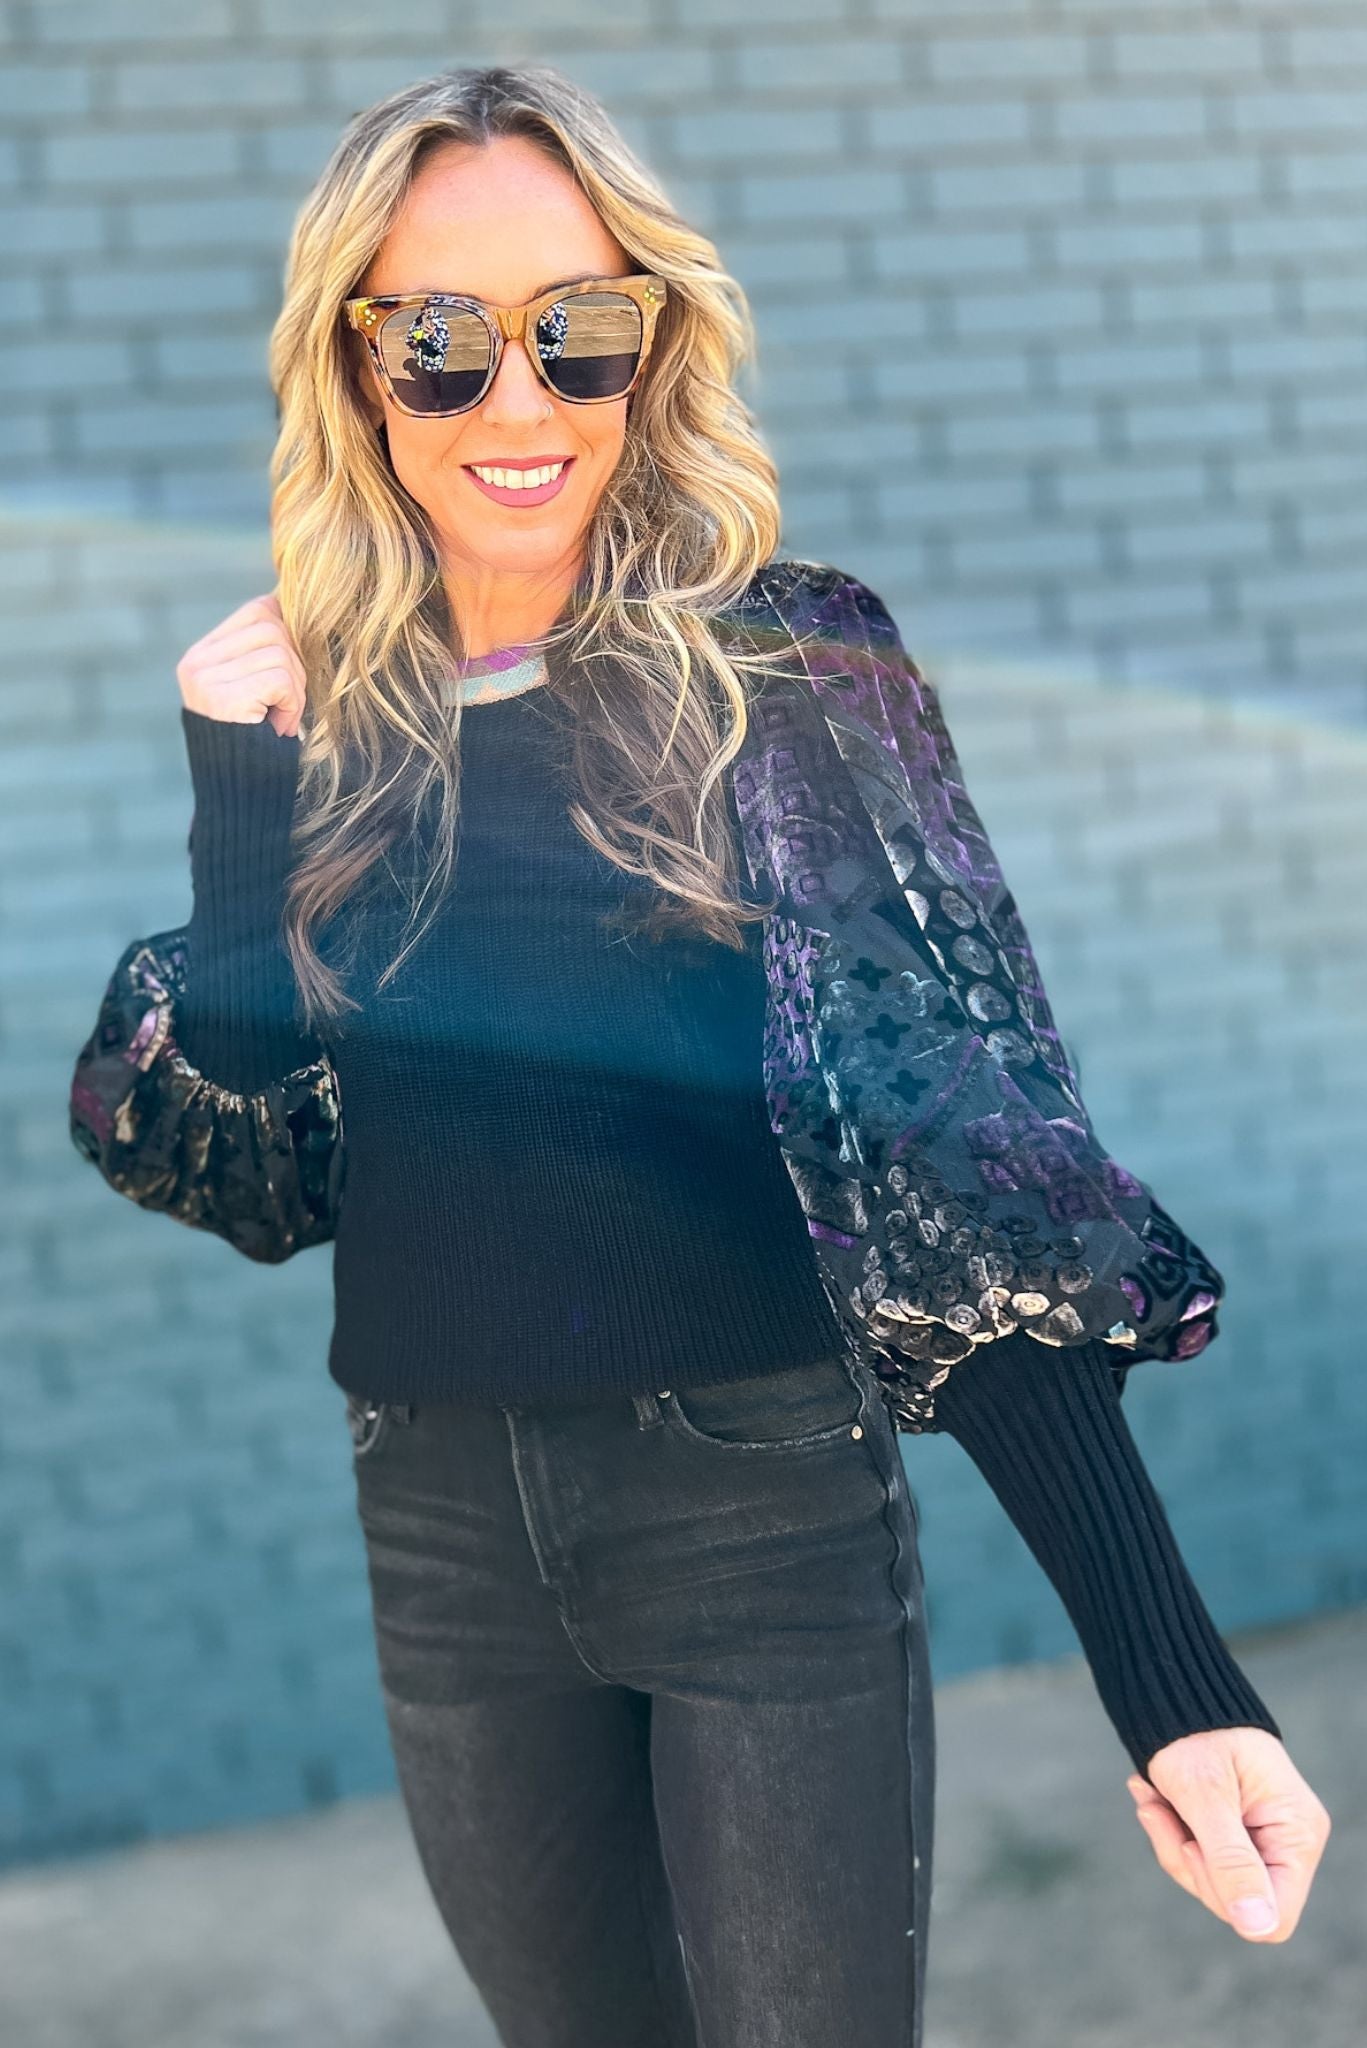 Black Burn out Velvet Contrast Puff sleeve Sweater new arrivals fall tops winter outfits shop style your senses by mallory fitzsimmons